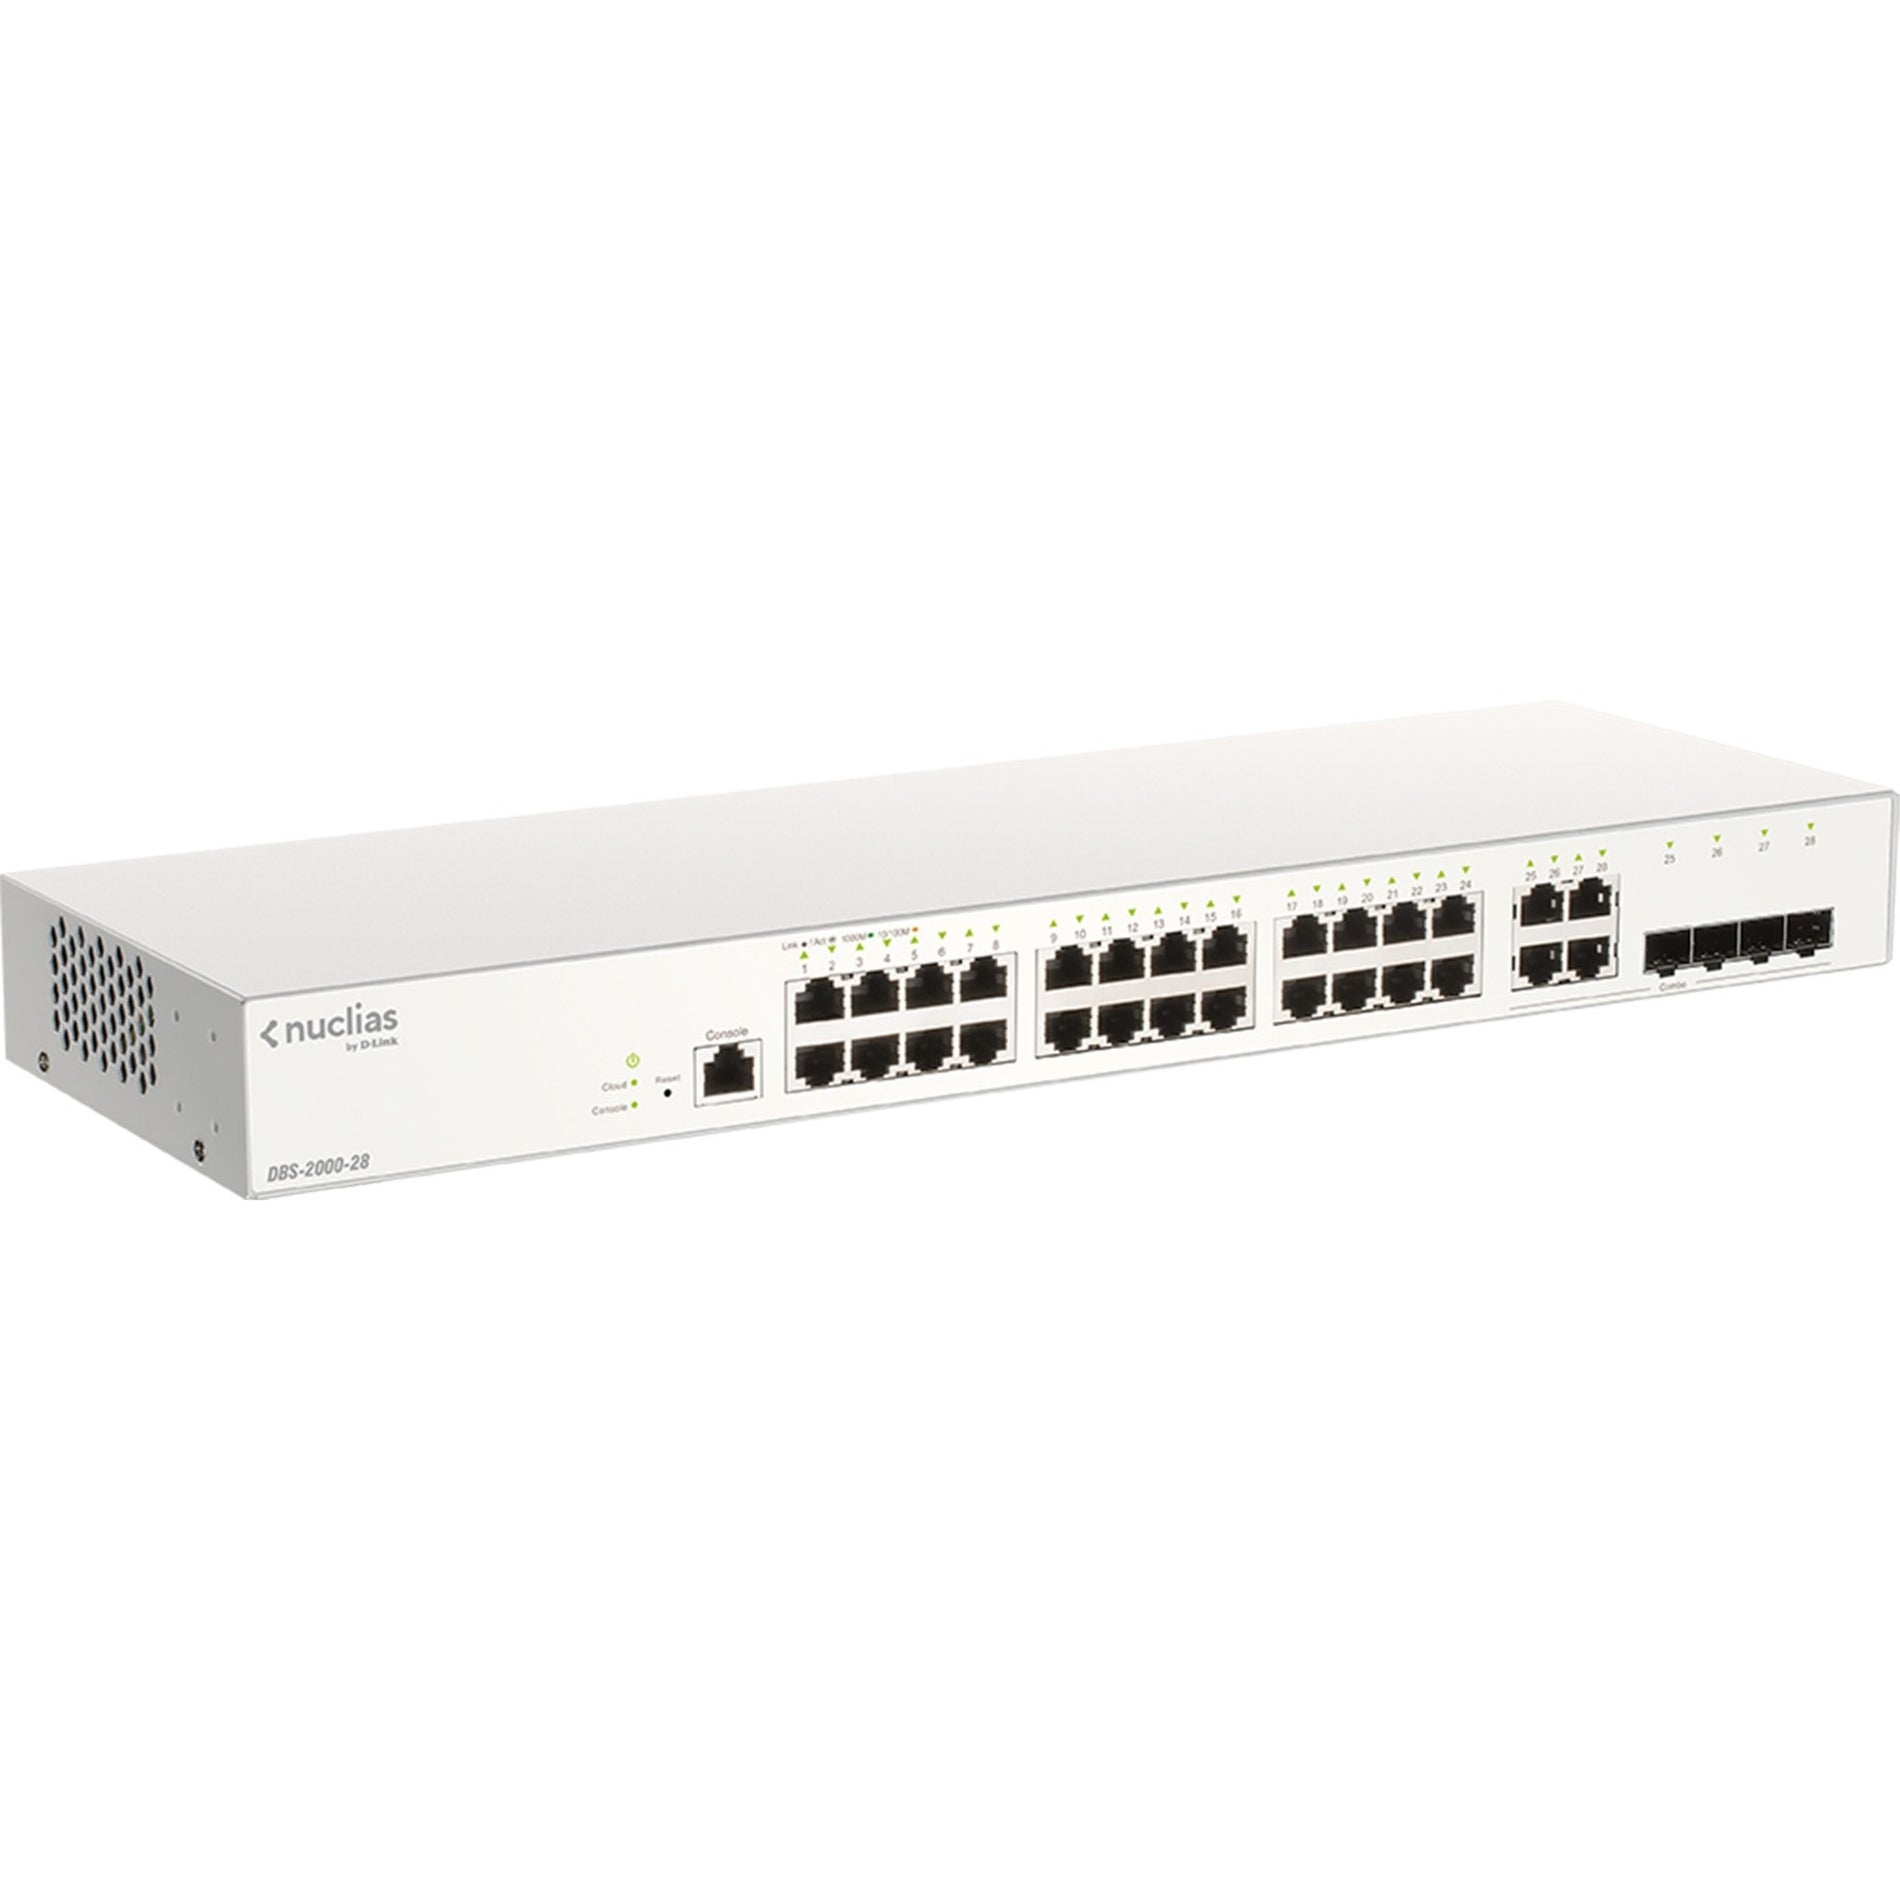 D-Link DBS-2000-28 28-Port Nuclias Cloud-Managed Switch, Gigabit Ethernet, Lifetime Warranty, Made in China